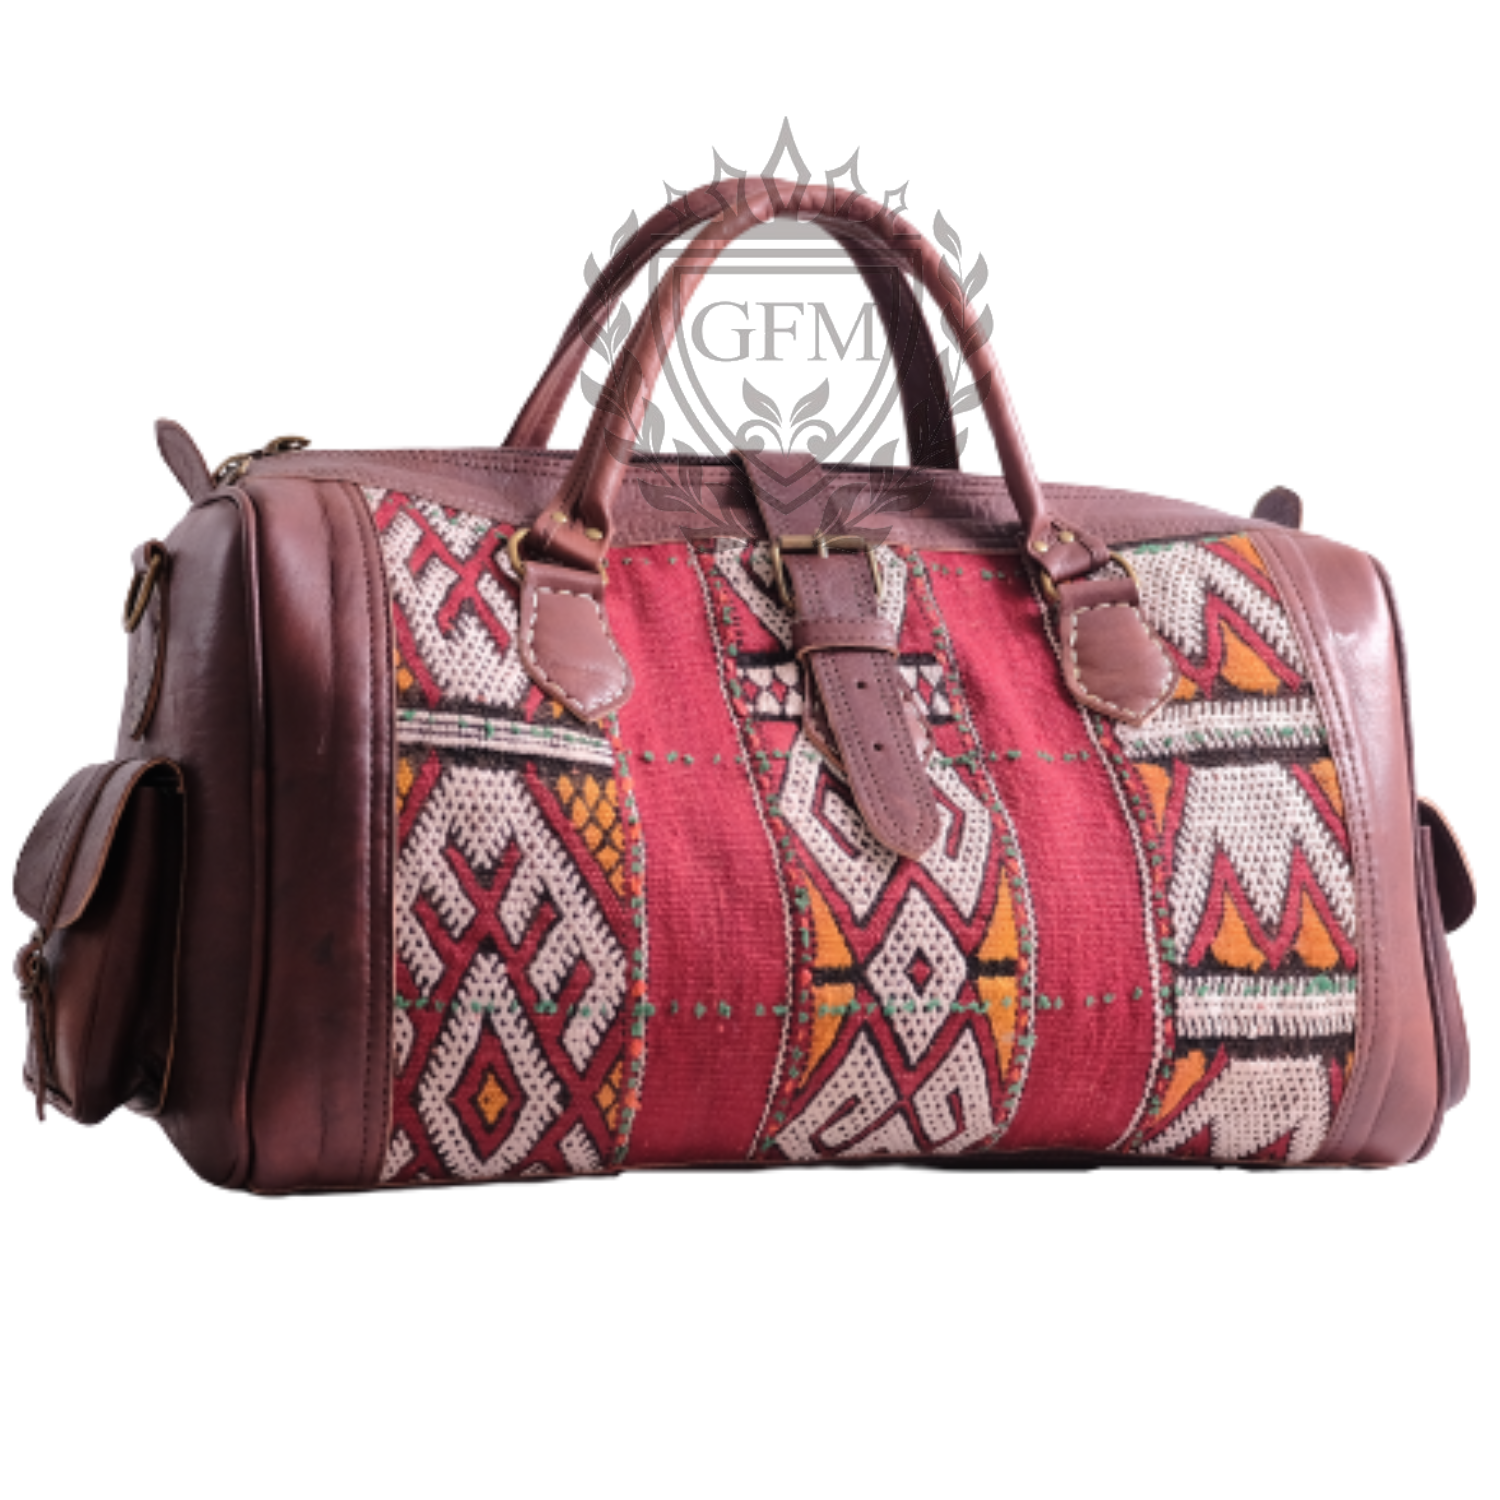 Are you planning a trip and in need of a stylish and functional travel bag? Look no further than Kilim Moroccan travel bags!